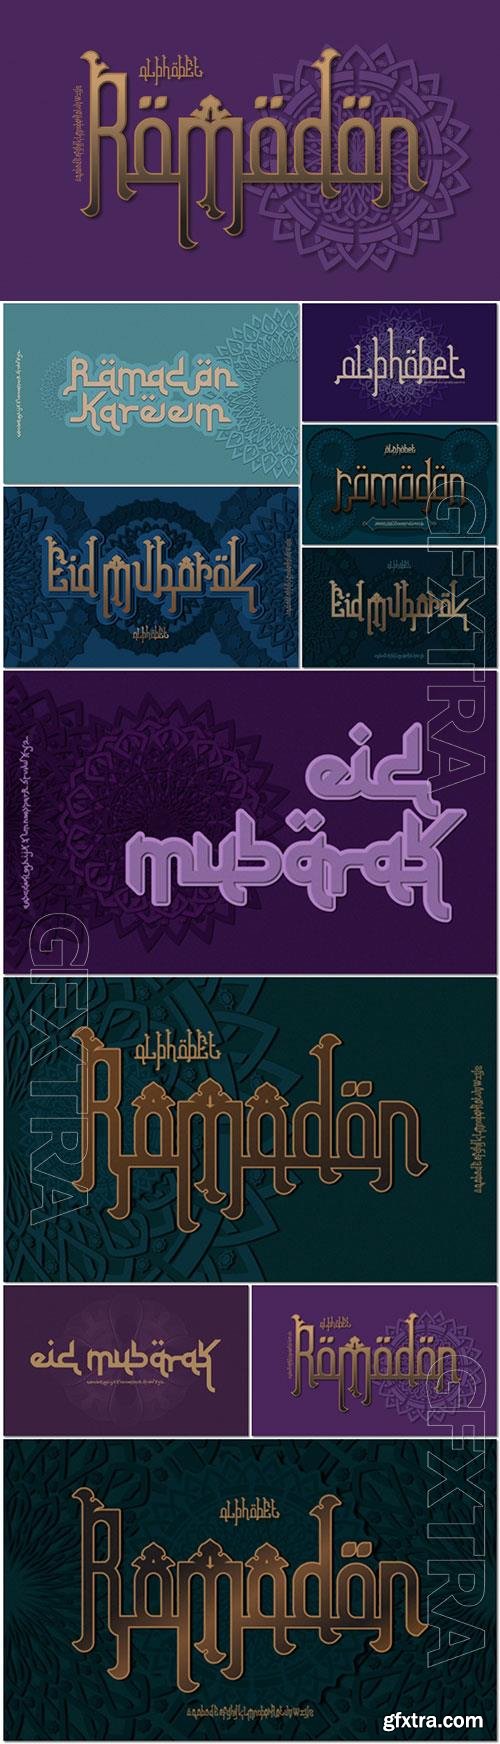 Elegant and luxury font with decorative background for ramadan in vector